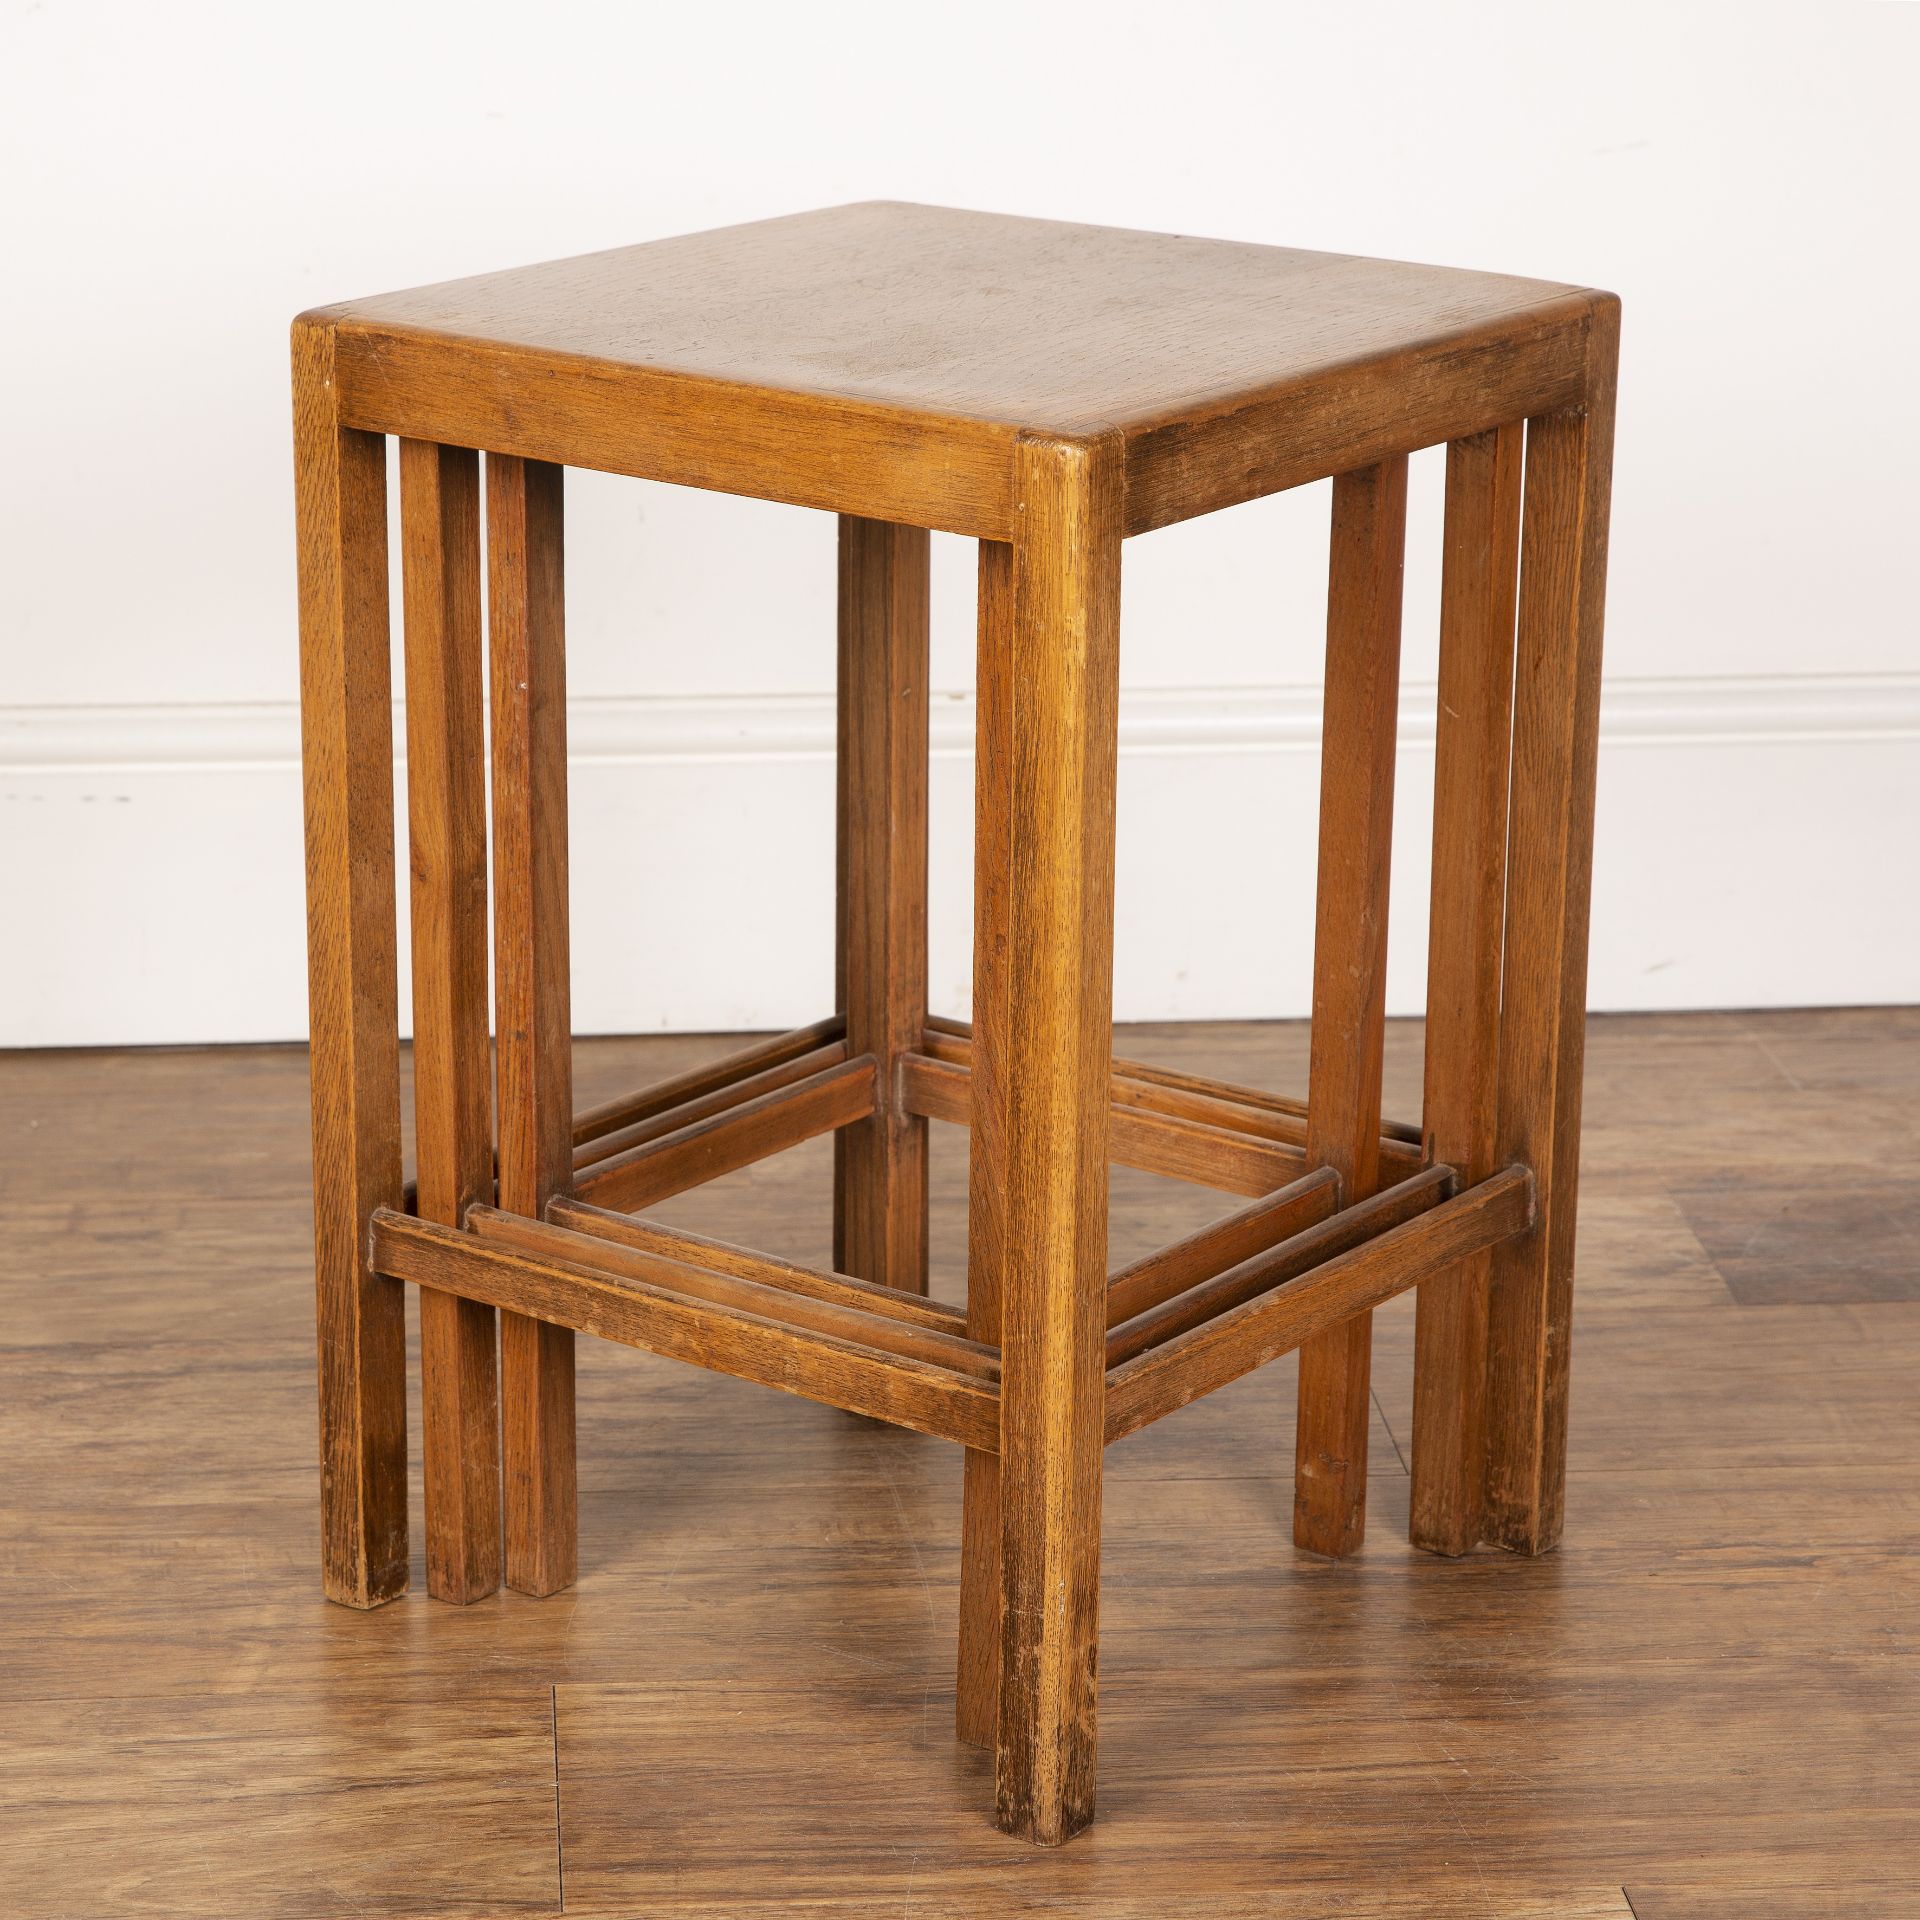 Heals style oak, nest of three tables, with square tops, the largest table measures 34cm wide x 49cm - Image 6 of 6